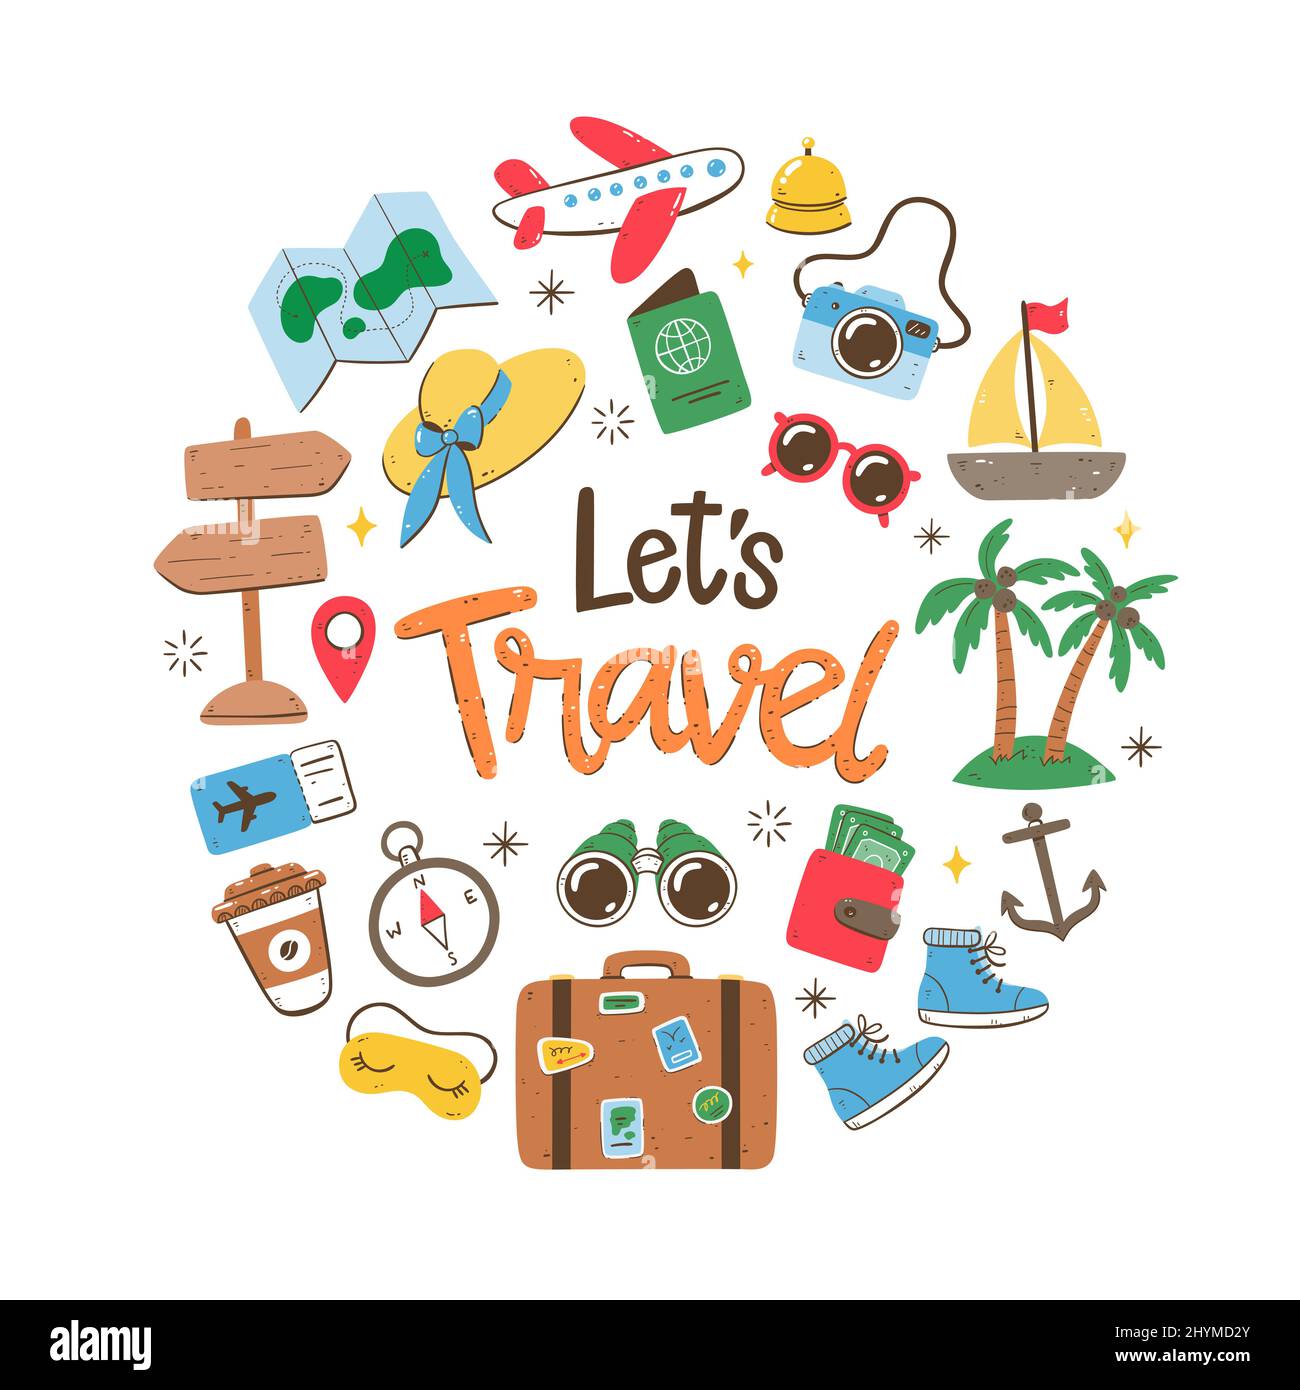 Travel holidays background. Colorful style. Cute hand drawn travel icons. Isolated objects on white background. Stock Vector